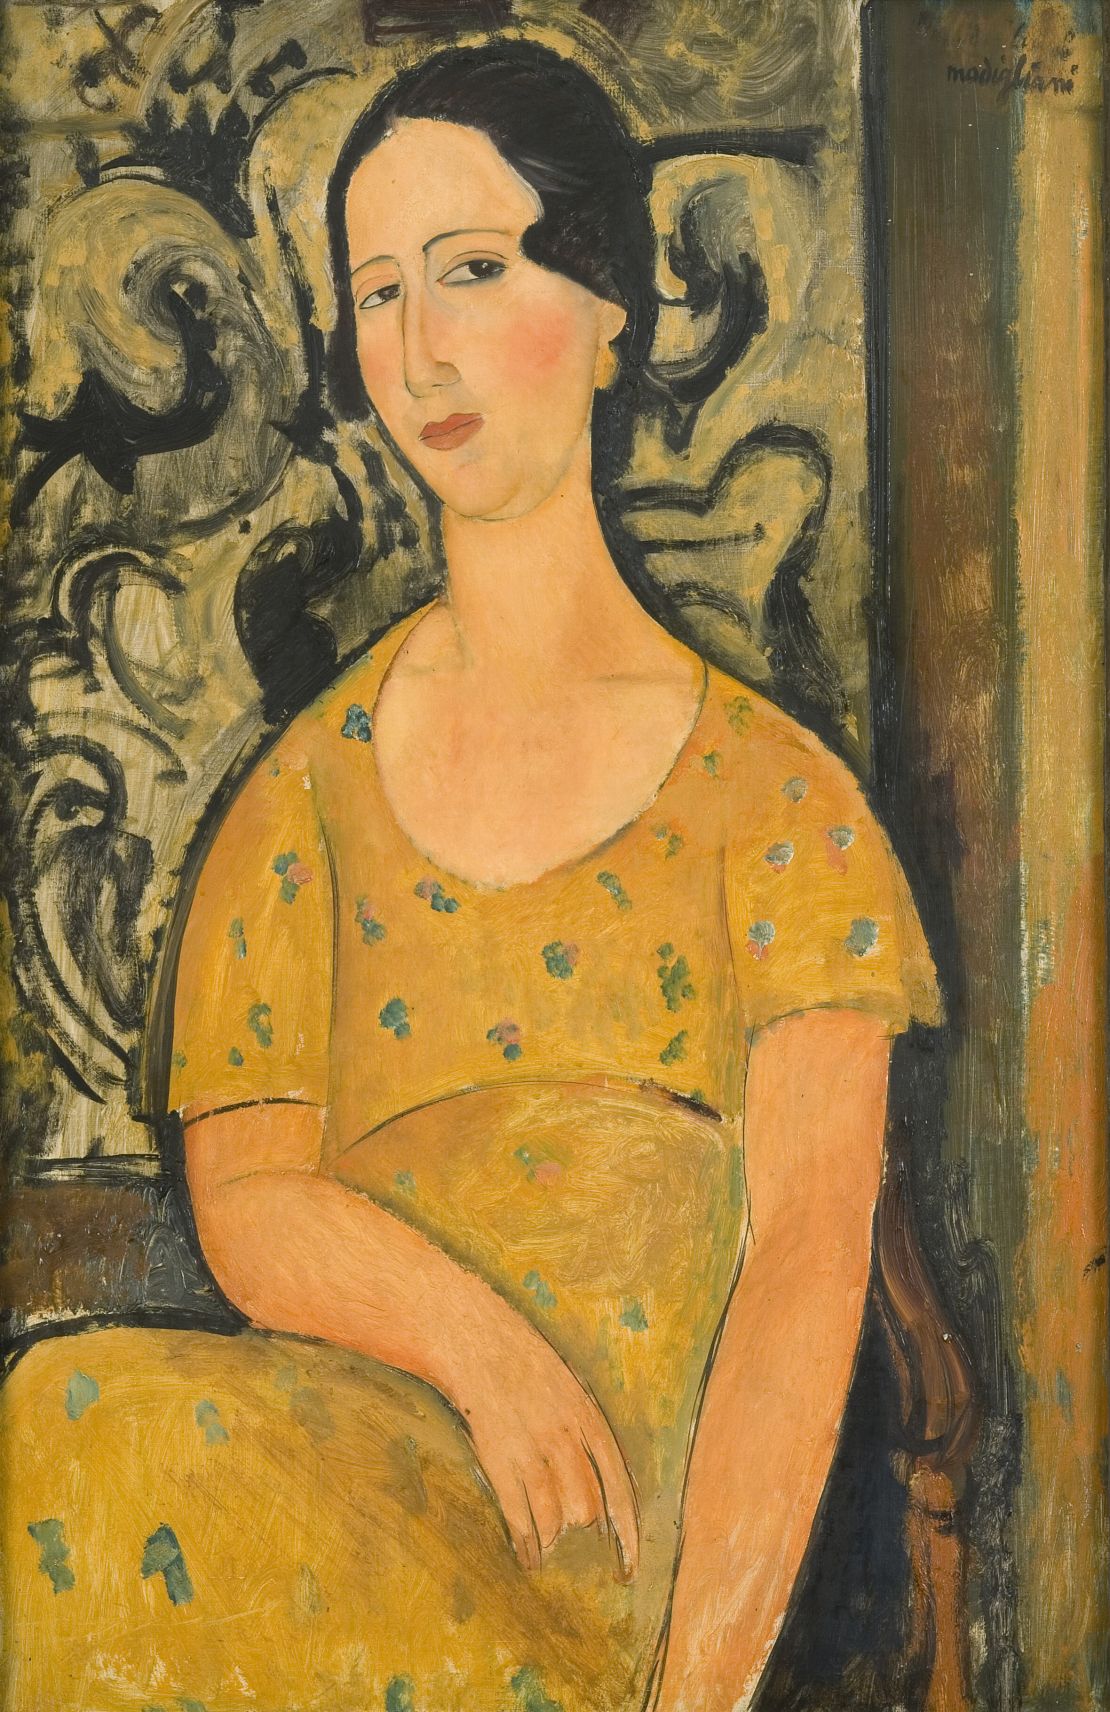 A new Modigliani show at the Barnes Foundation closely studies the techniques of the artist, whose turbulent life often overshadowed his artistic skill.